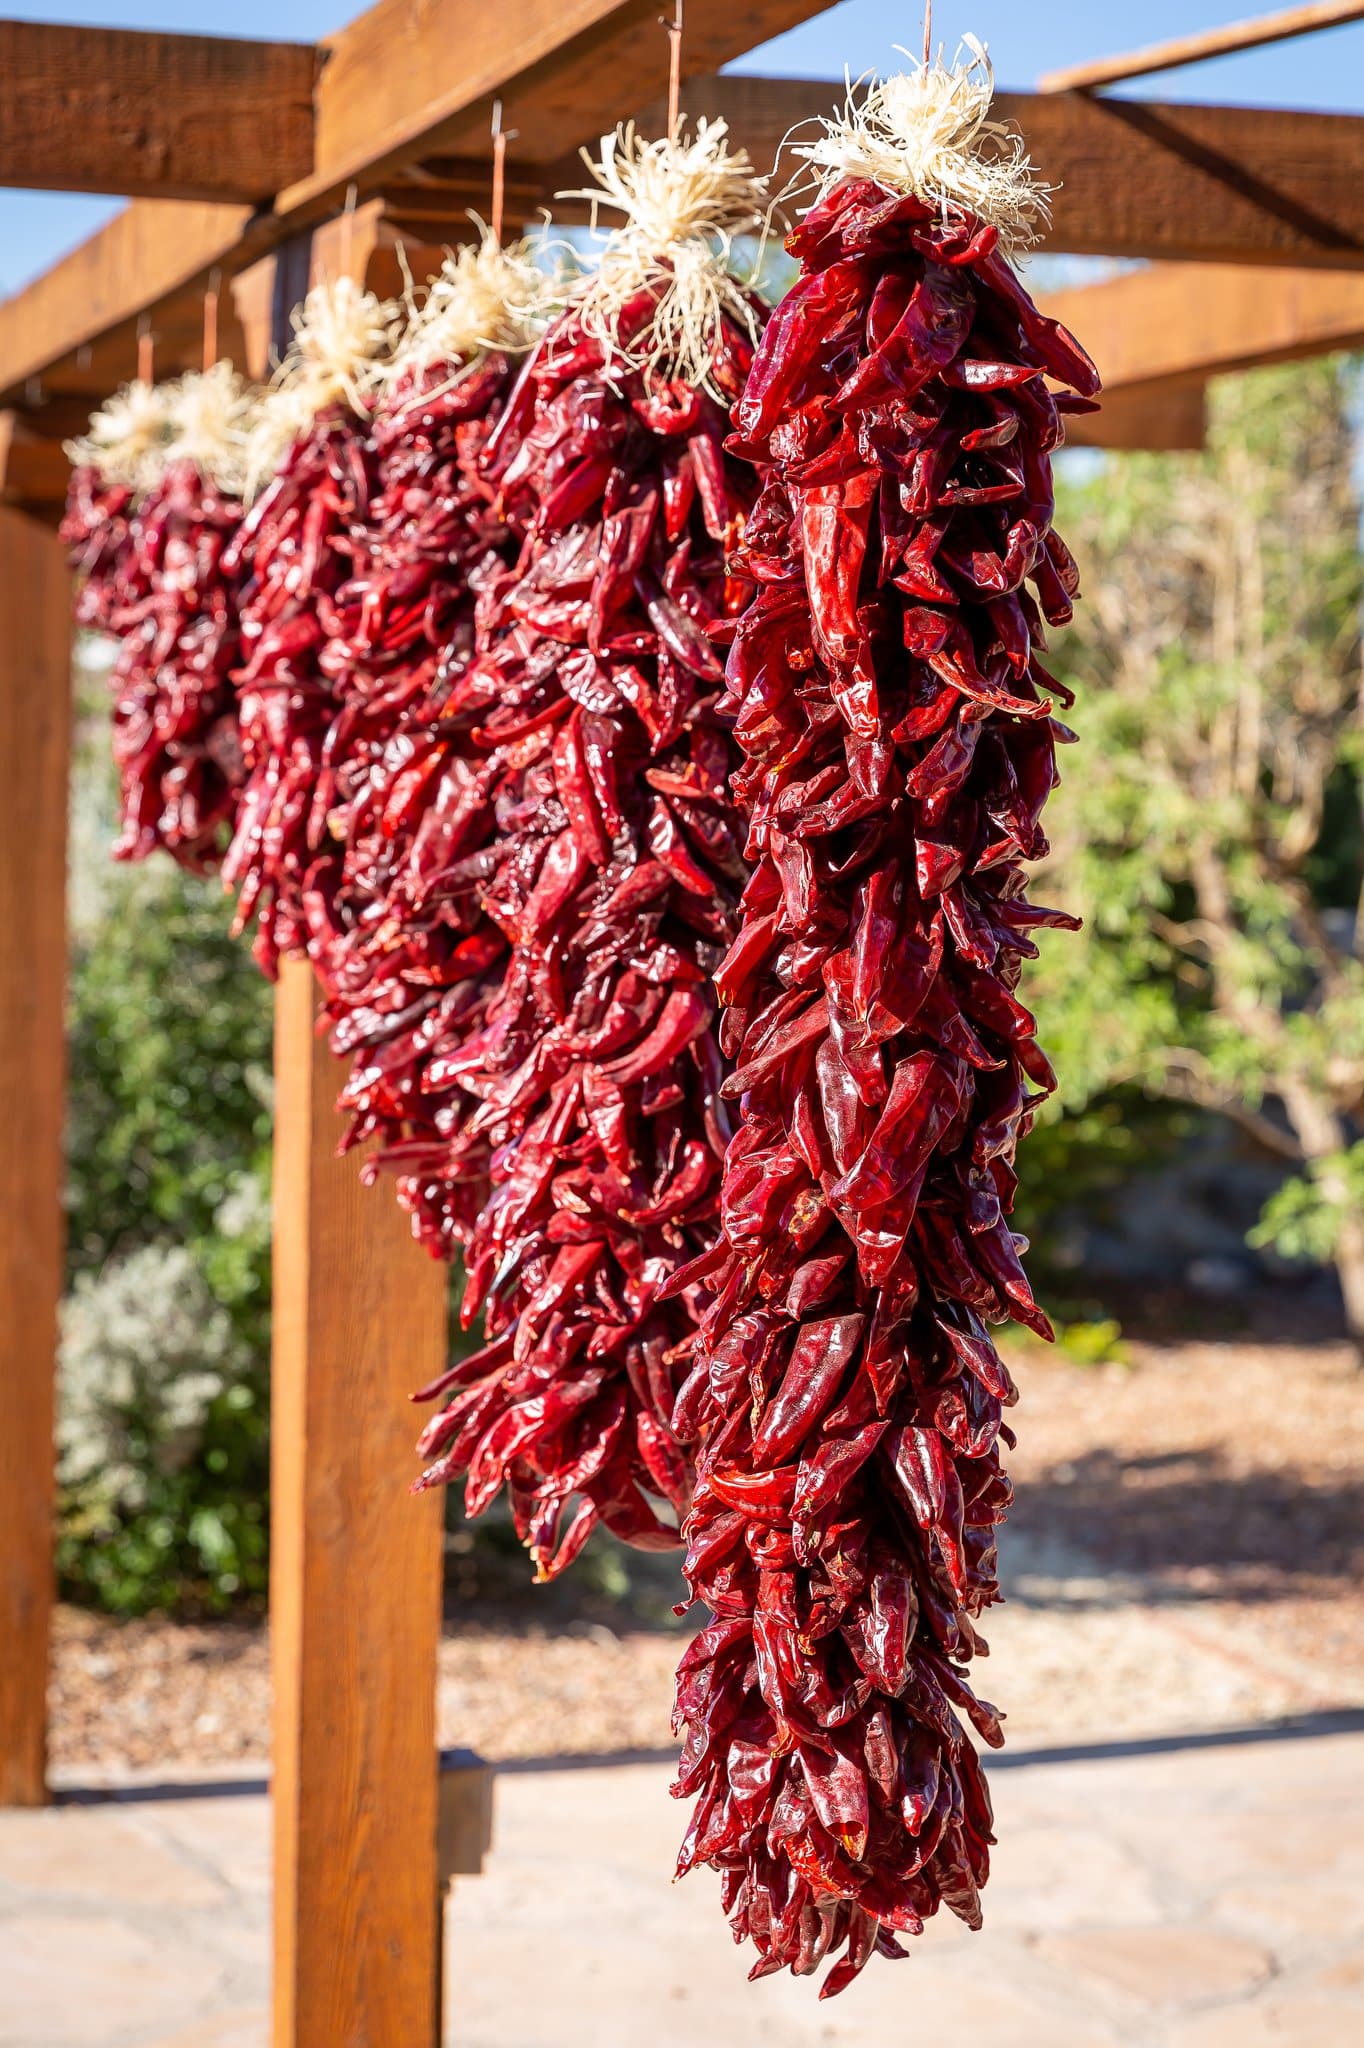 Chili peppers tied in large bundles hanging from a wooden frame in a sunny outdoor setting, displaying a vibrant red color typical of Traditional Sandia Ristras.